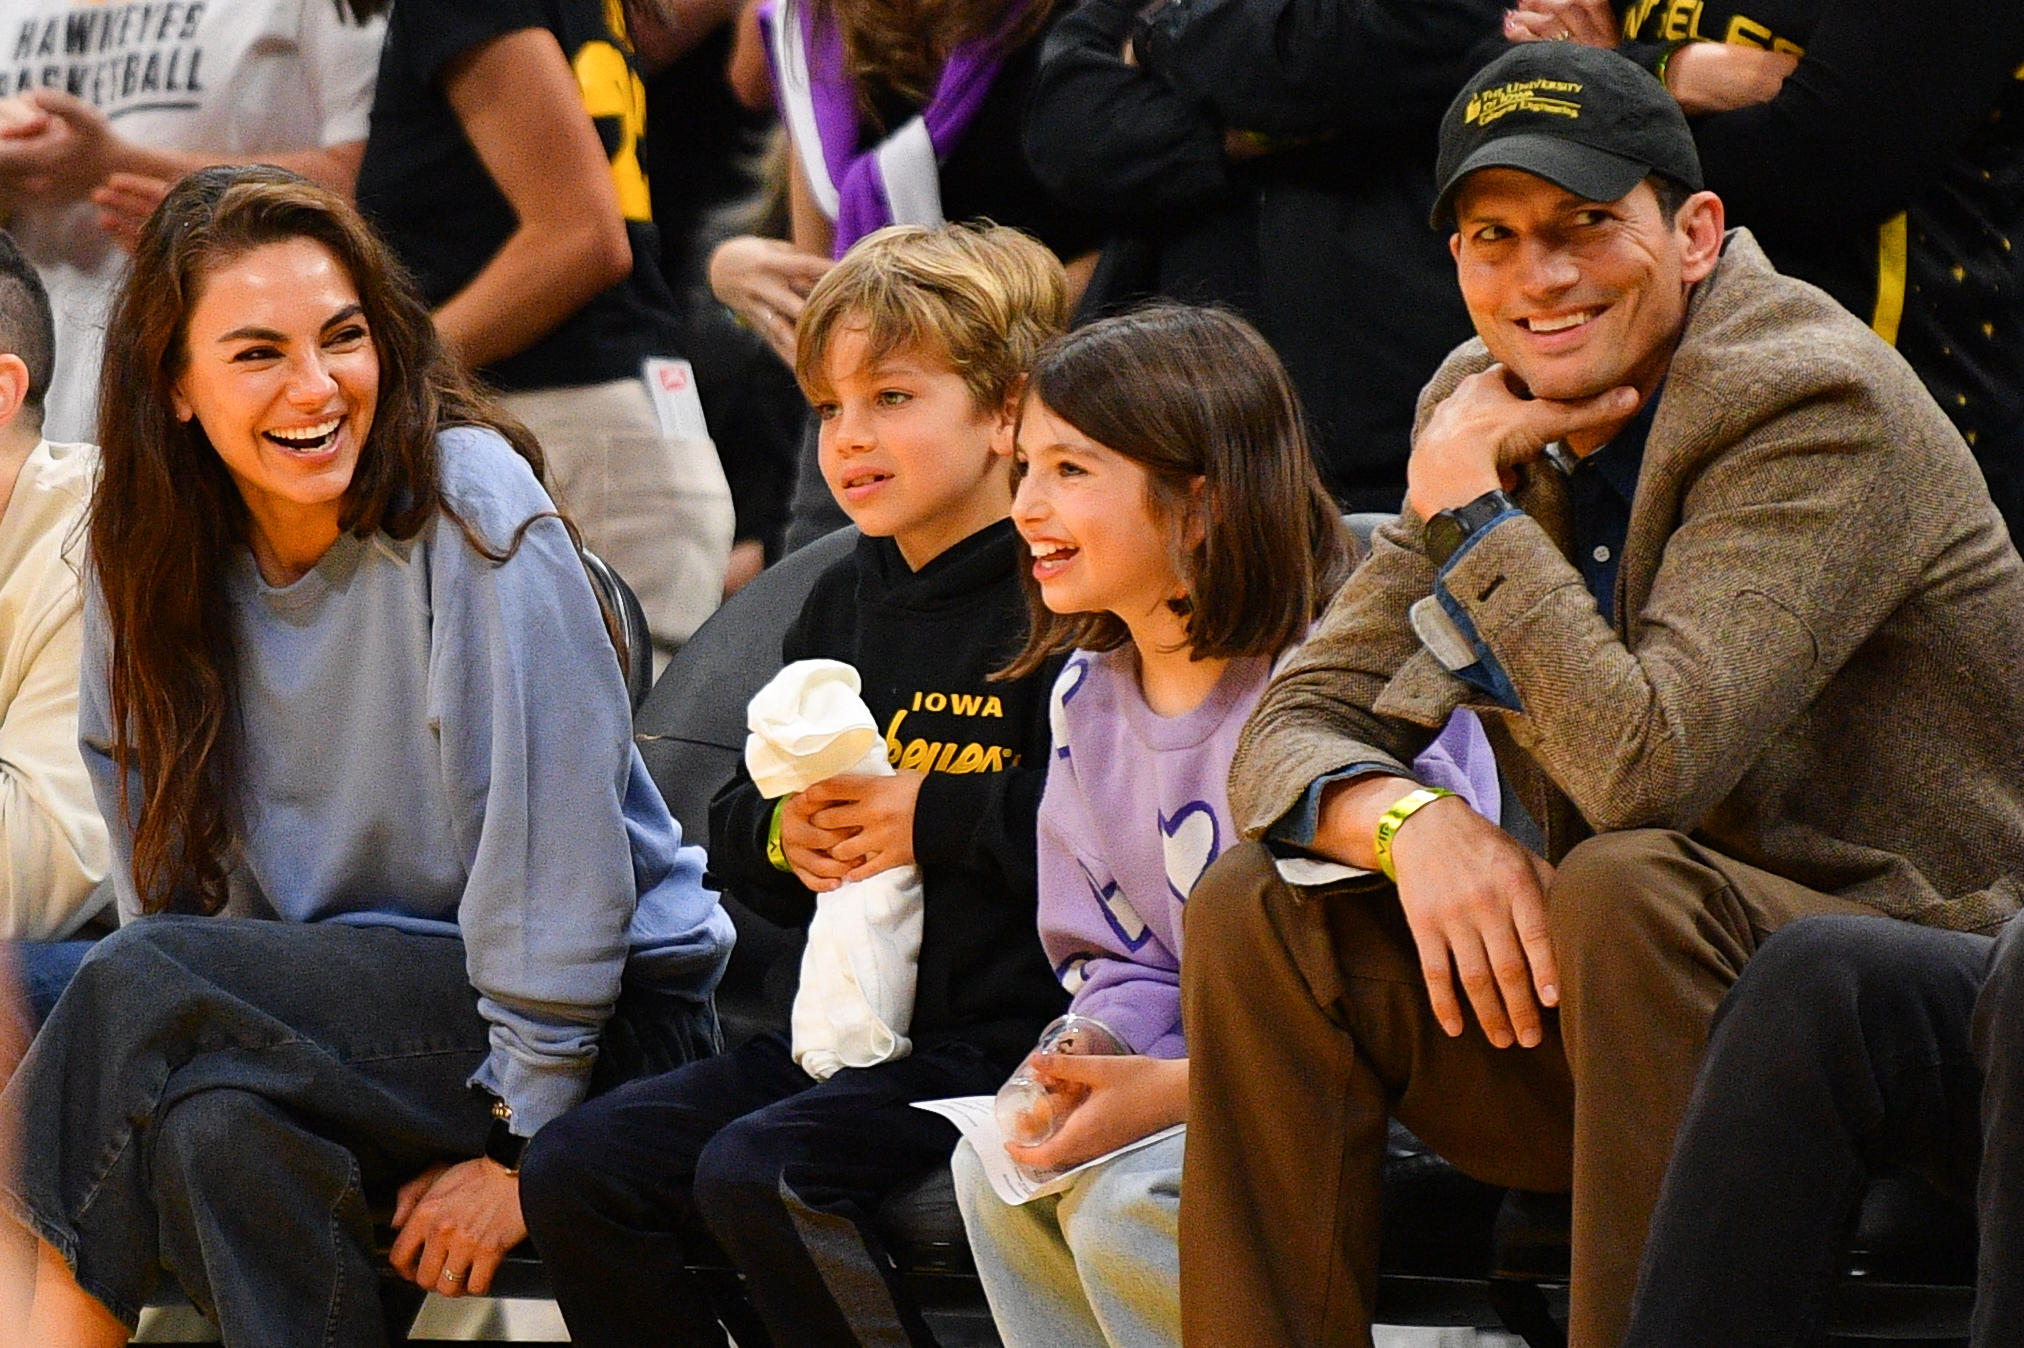 Mila Kunis, Ashton Kutcher and their children, Wyatt and Dimitri Kutcher, during the WNBA basketball game in Los Angeles, California on May 24, 2024 | Source: Getty Images